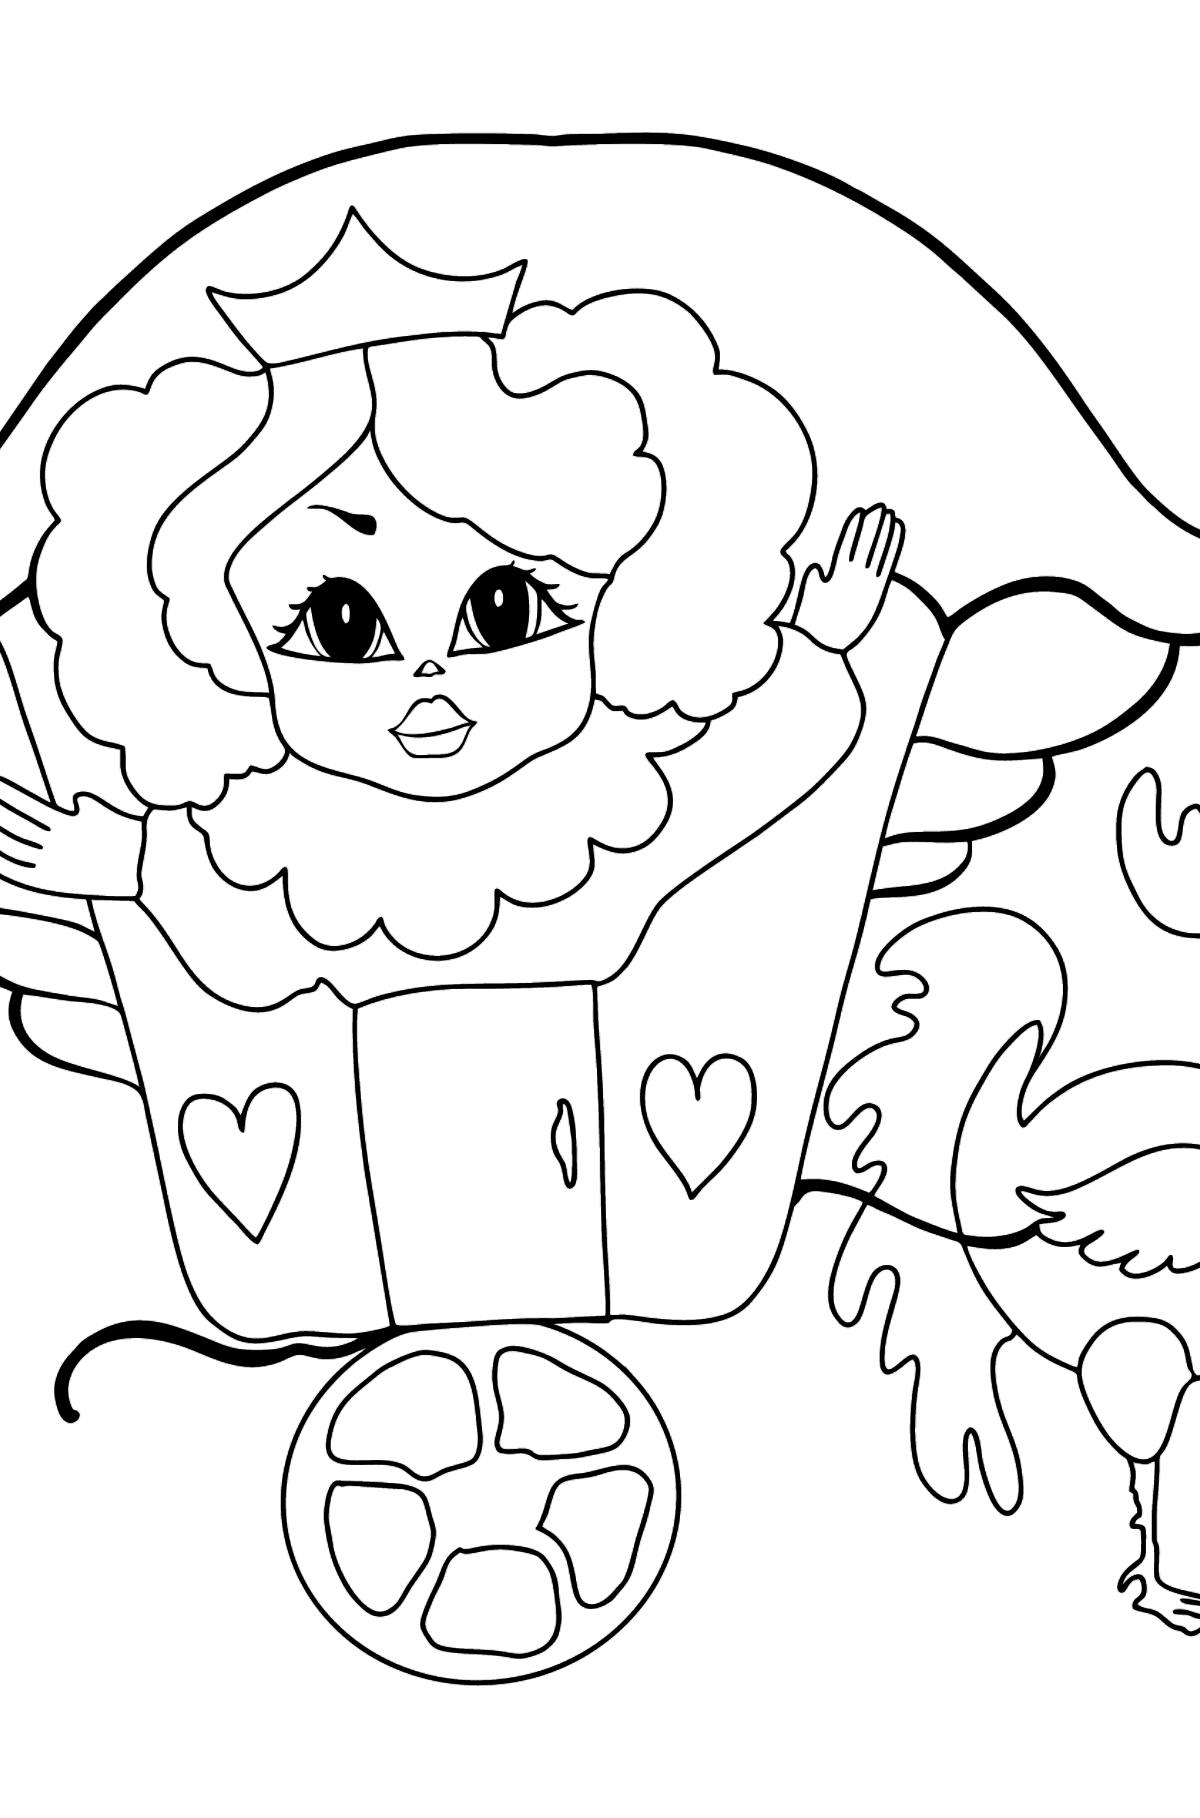 Coloring Picture - A Princess in a Beautiful Carriage - Coloring Pages for Kids